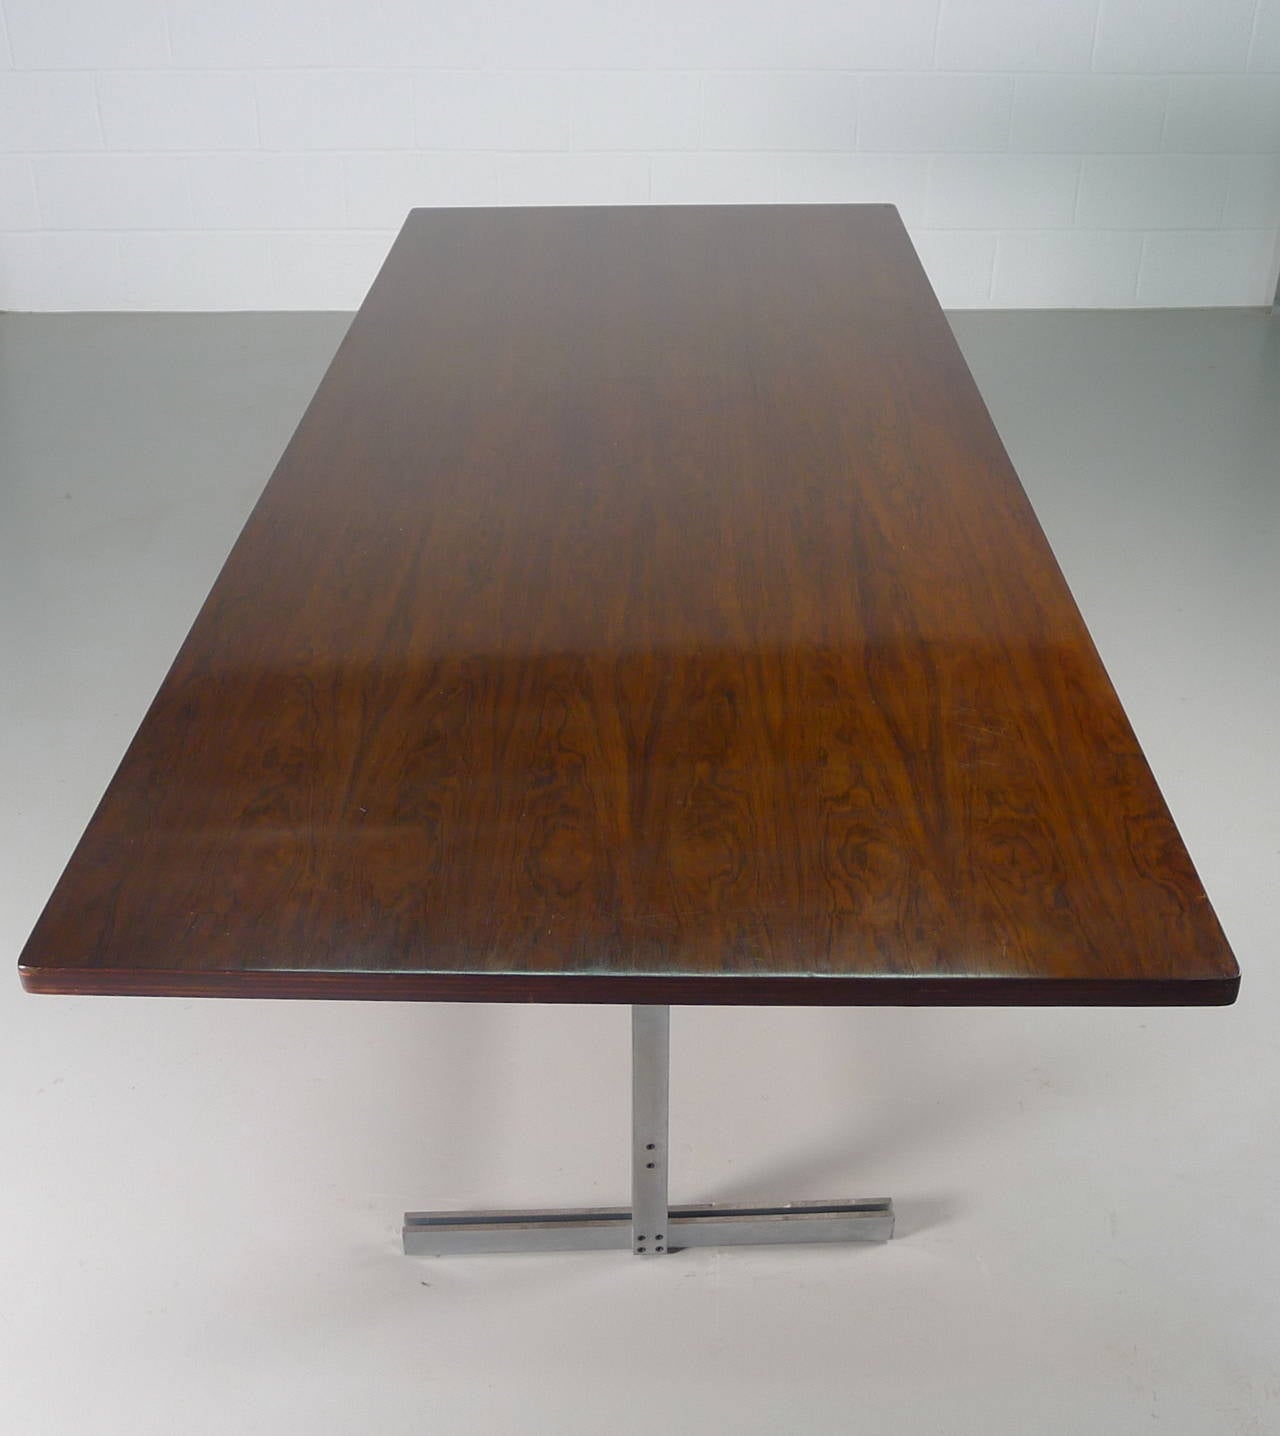 Jules Wabbes , Belgium . 1960's . Rosewood topped dining table or desk over stainless steel frame . Minimal and elegant .

Excellent vintage condition